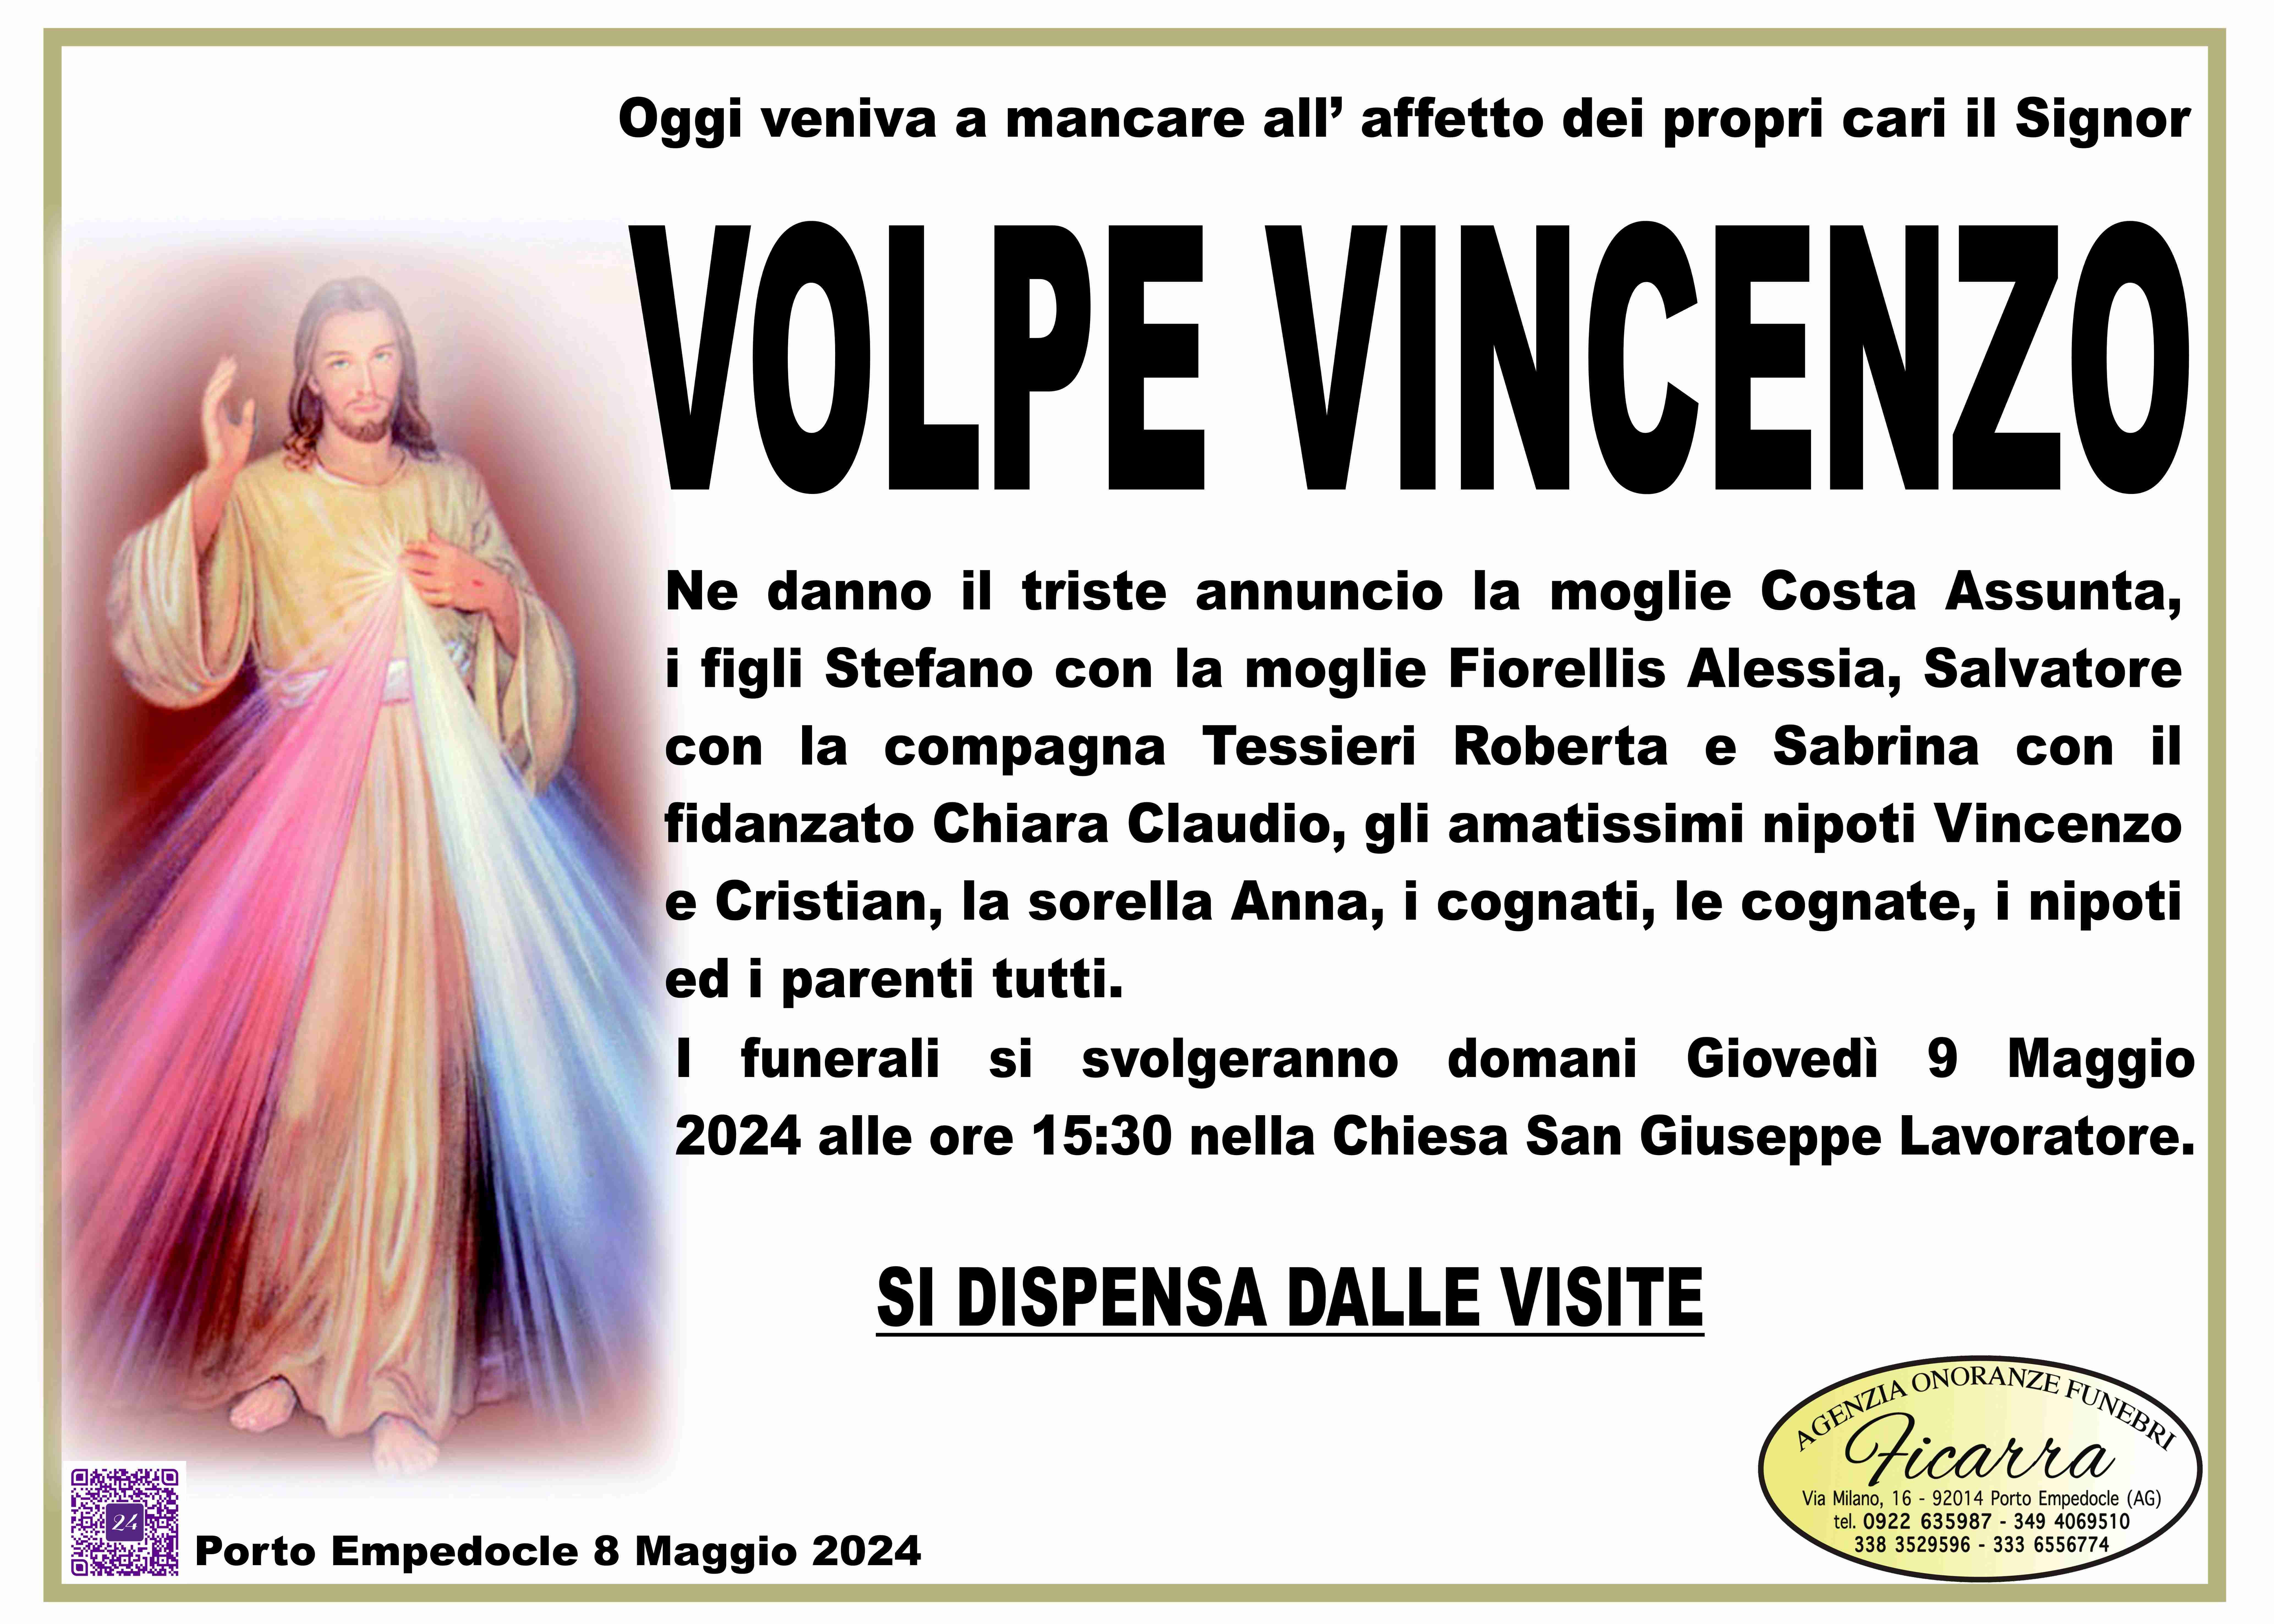 Vincenzo Volpe